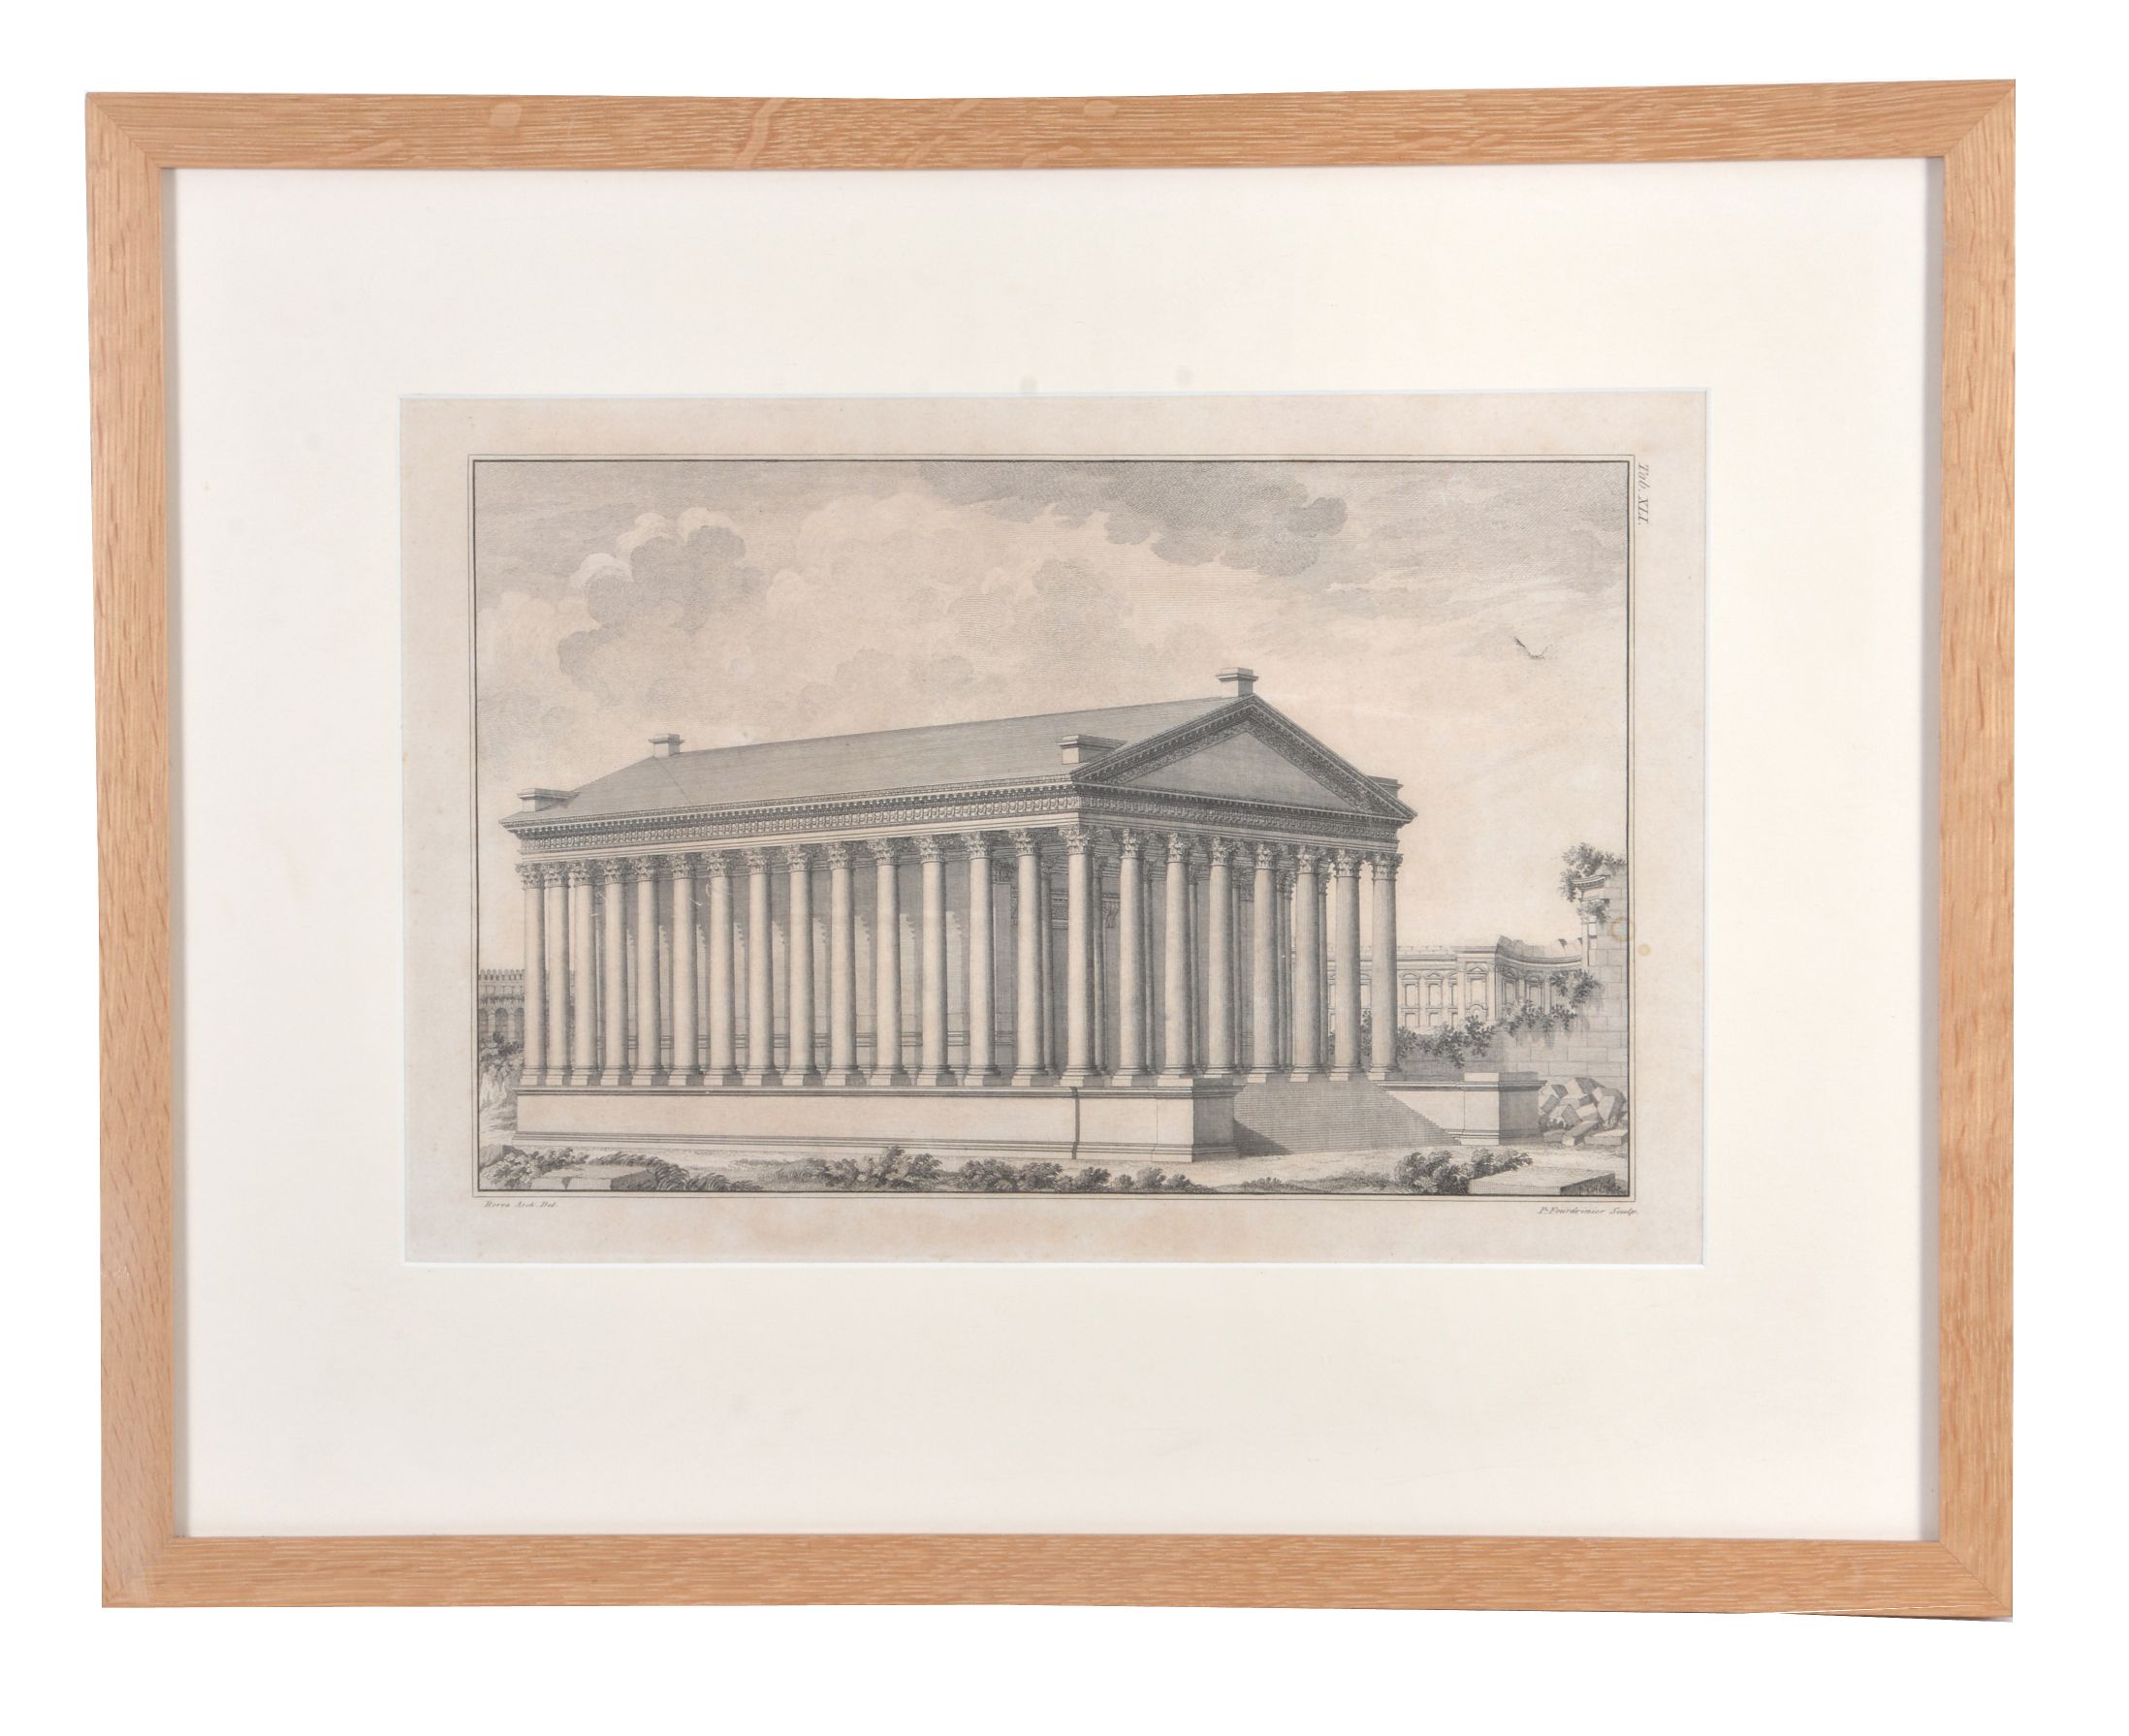 A mixed group of decorative prints. Including views of classical ruins, vases and urns, botanical